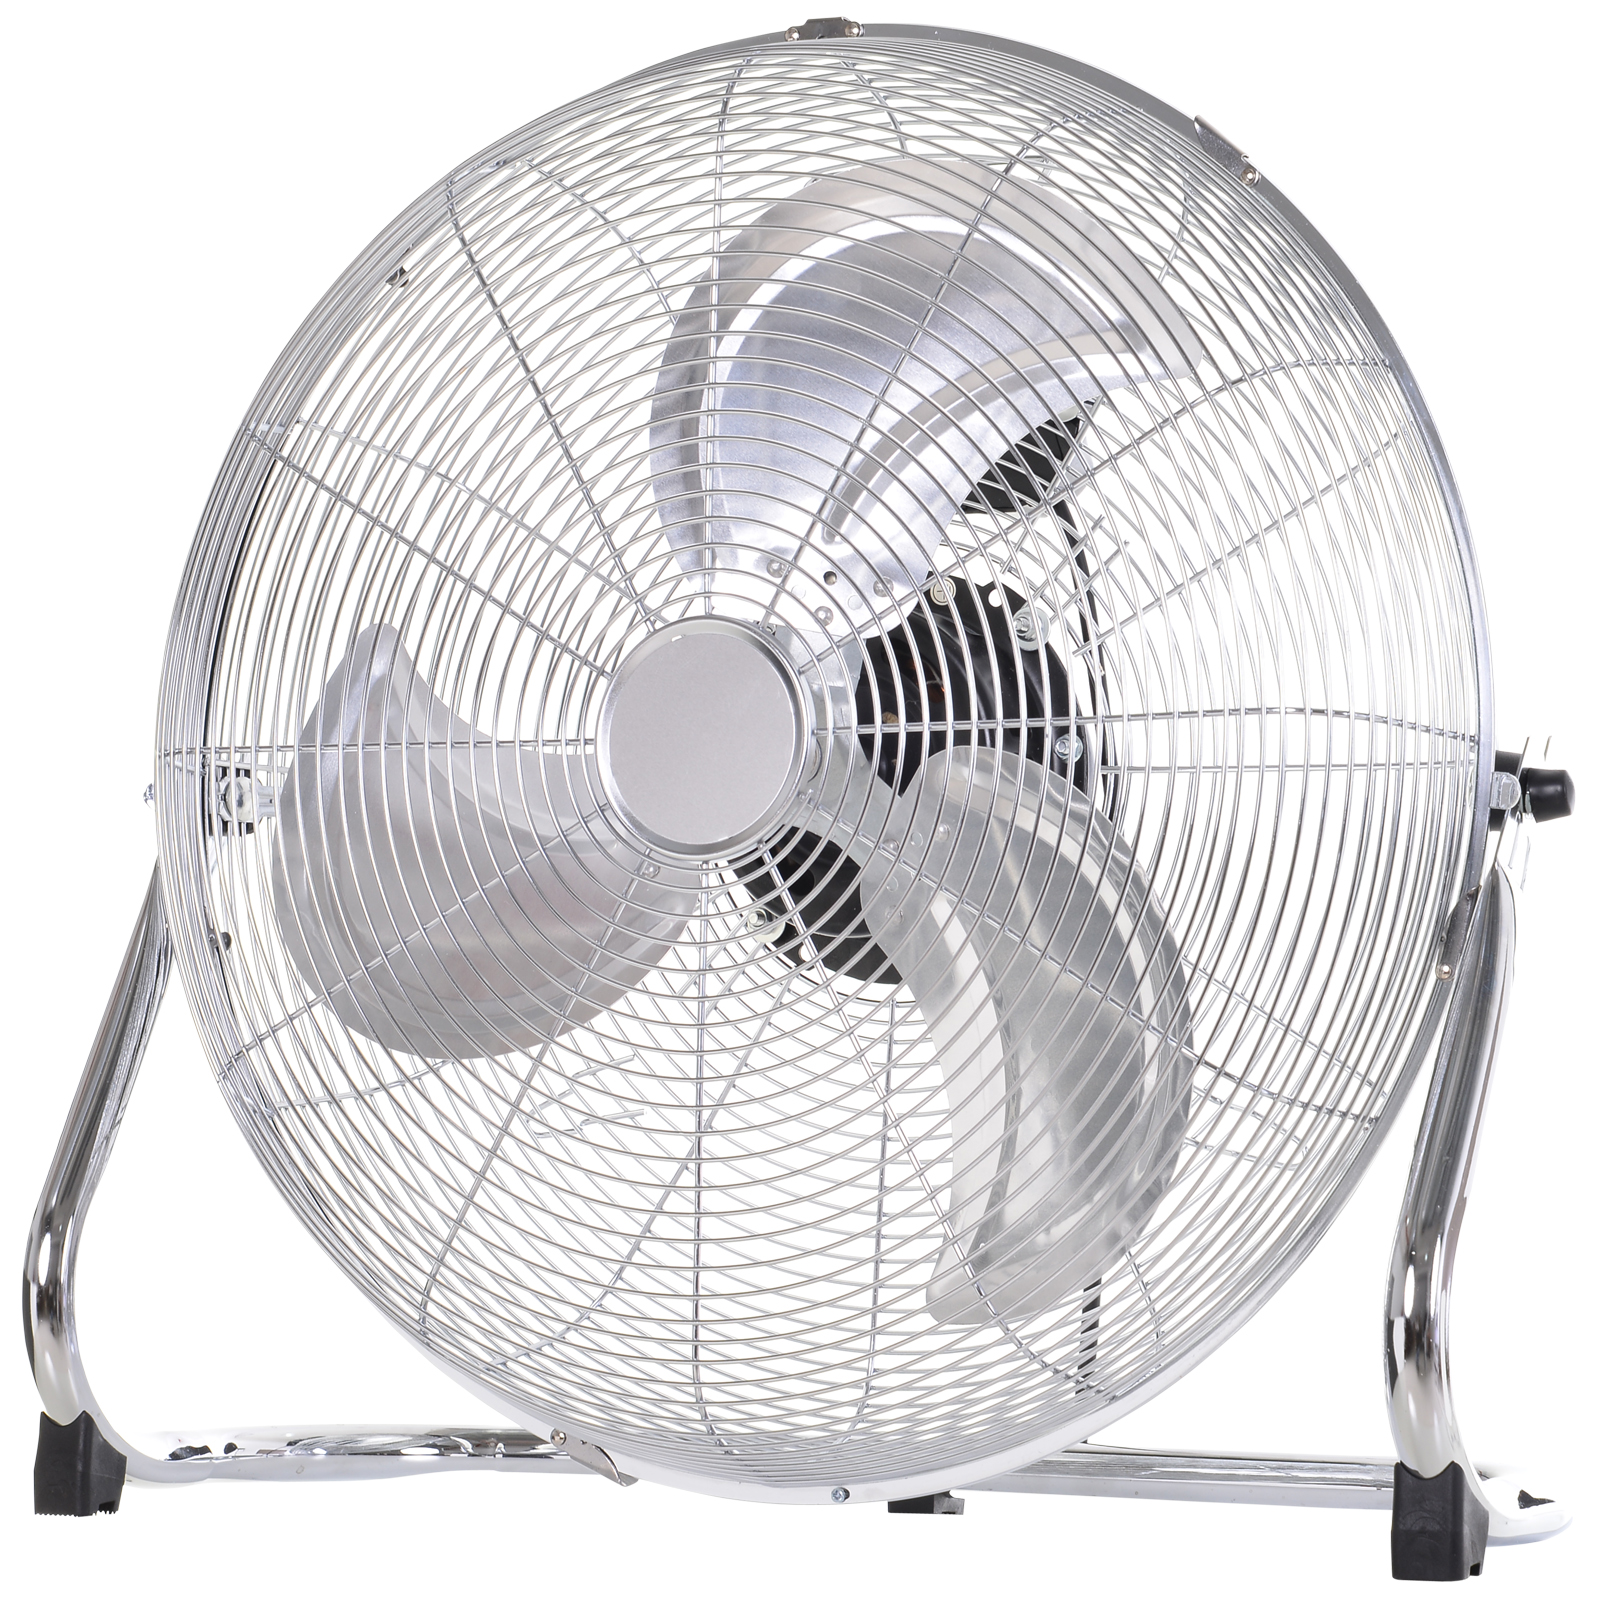 Homcom 20" Chrome Metal Floor Standing Fan With Tilting, High Velocity, 3 Speed, Portable Gym Fan For Home Office, Silver